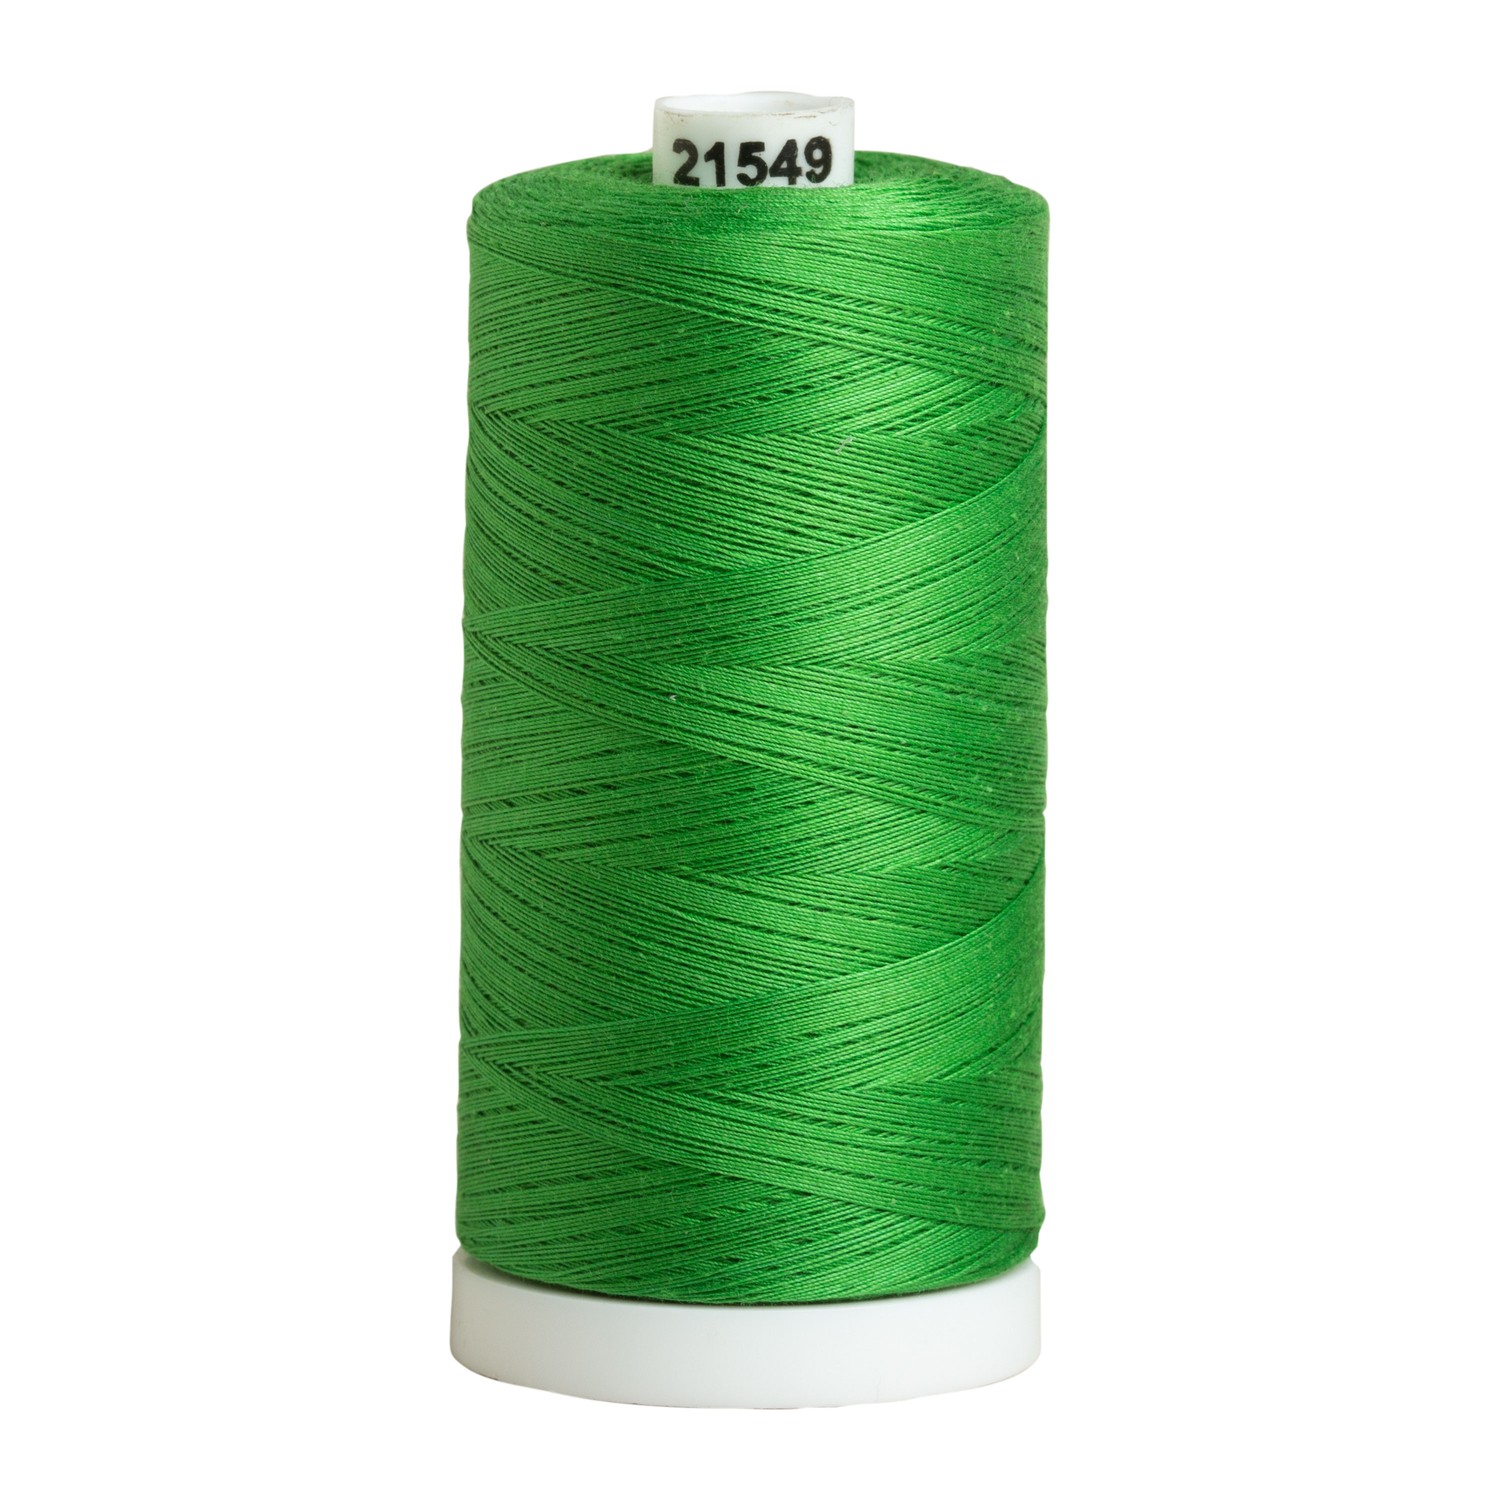 Corn Silk #018 - Wool Thread for Needle Punch and Wool Applique